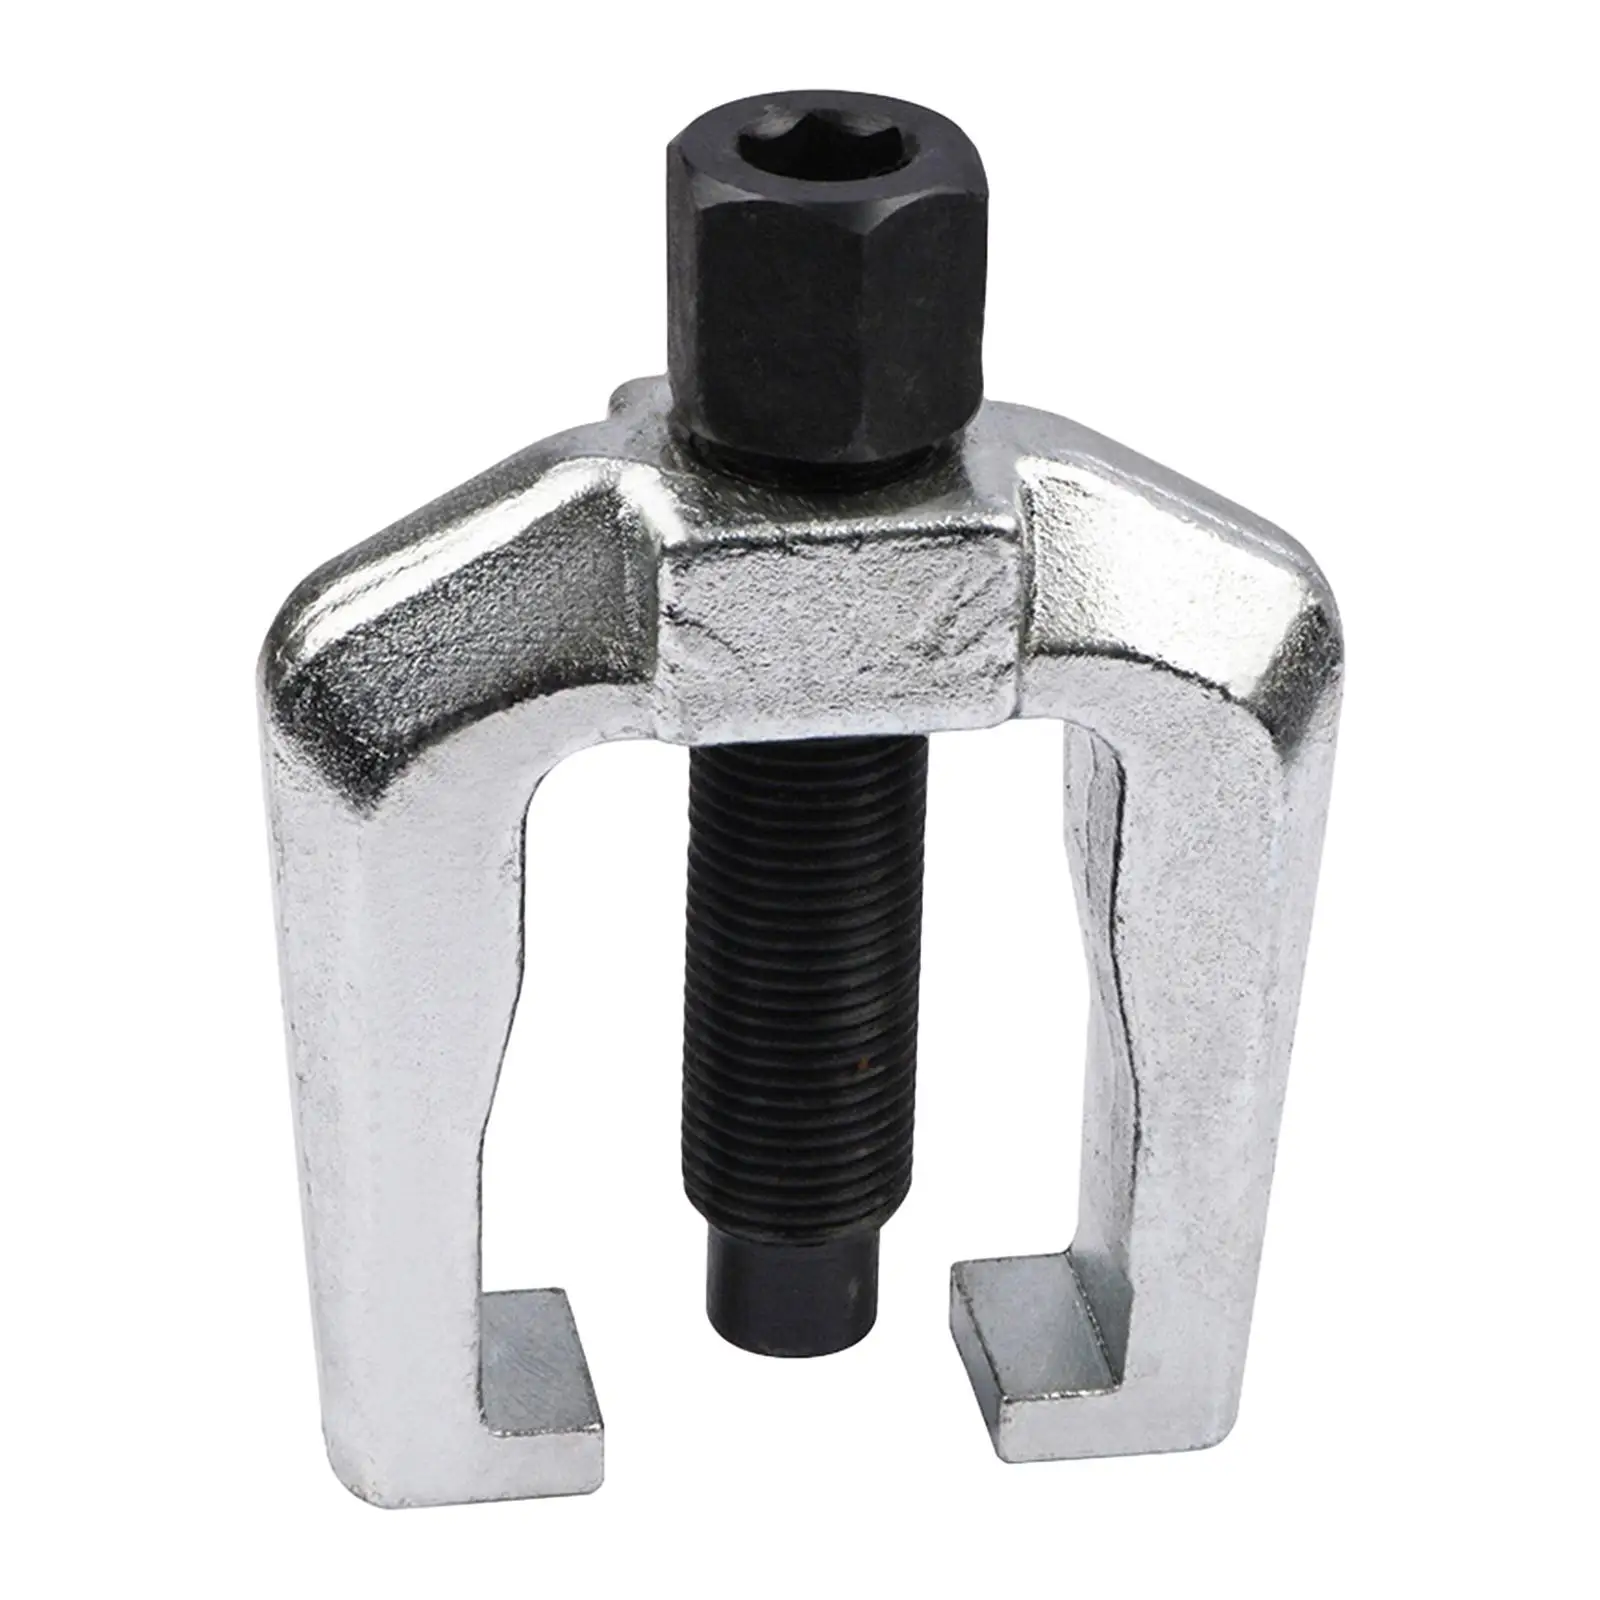 Slack Adjuster Puller Works on Automatic Adjusters Sturdy Compact 2 Jaw Gear Puller Durable Removal Tool for Gears Remover Tool